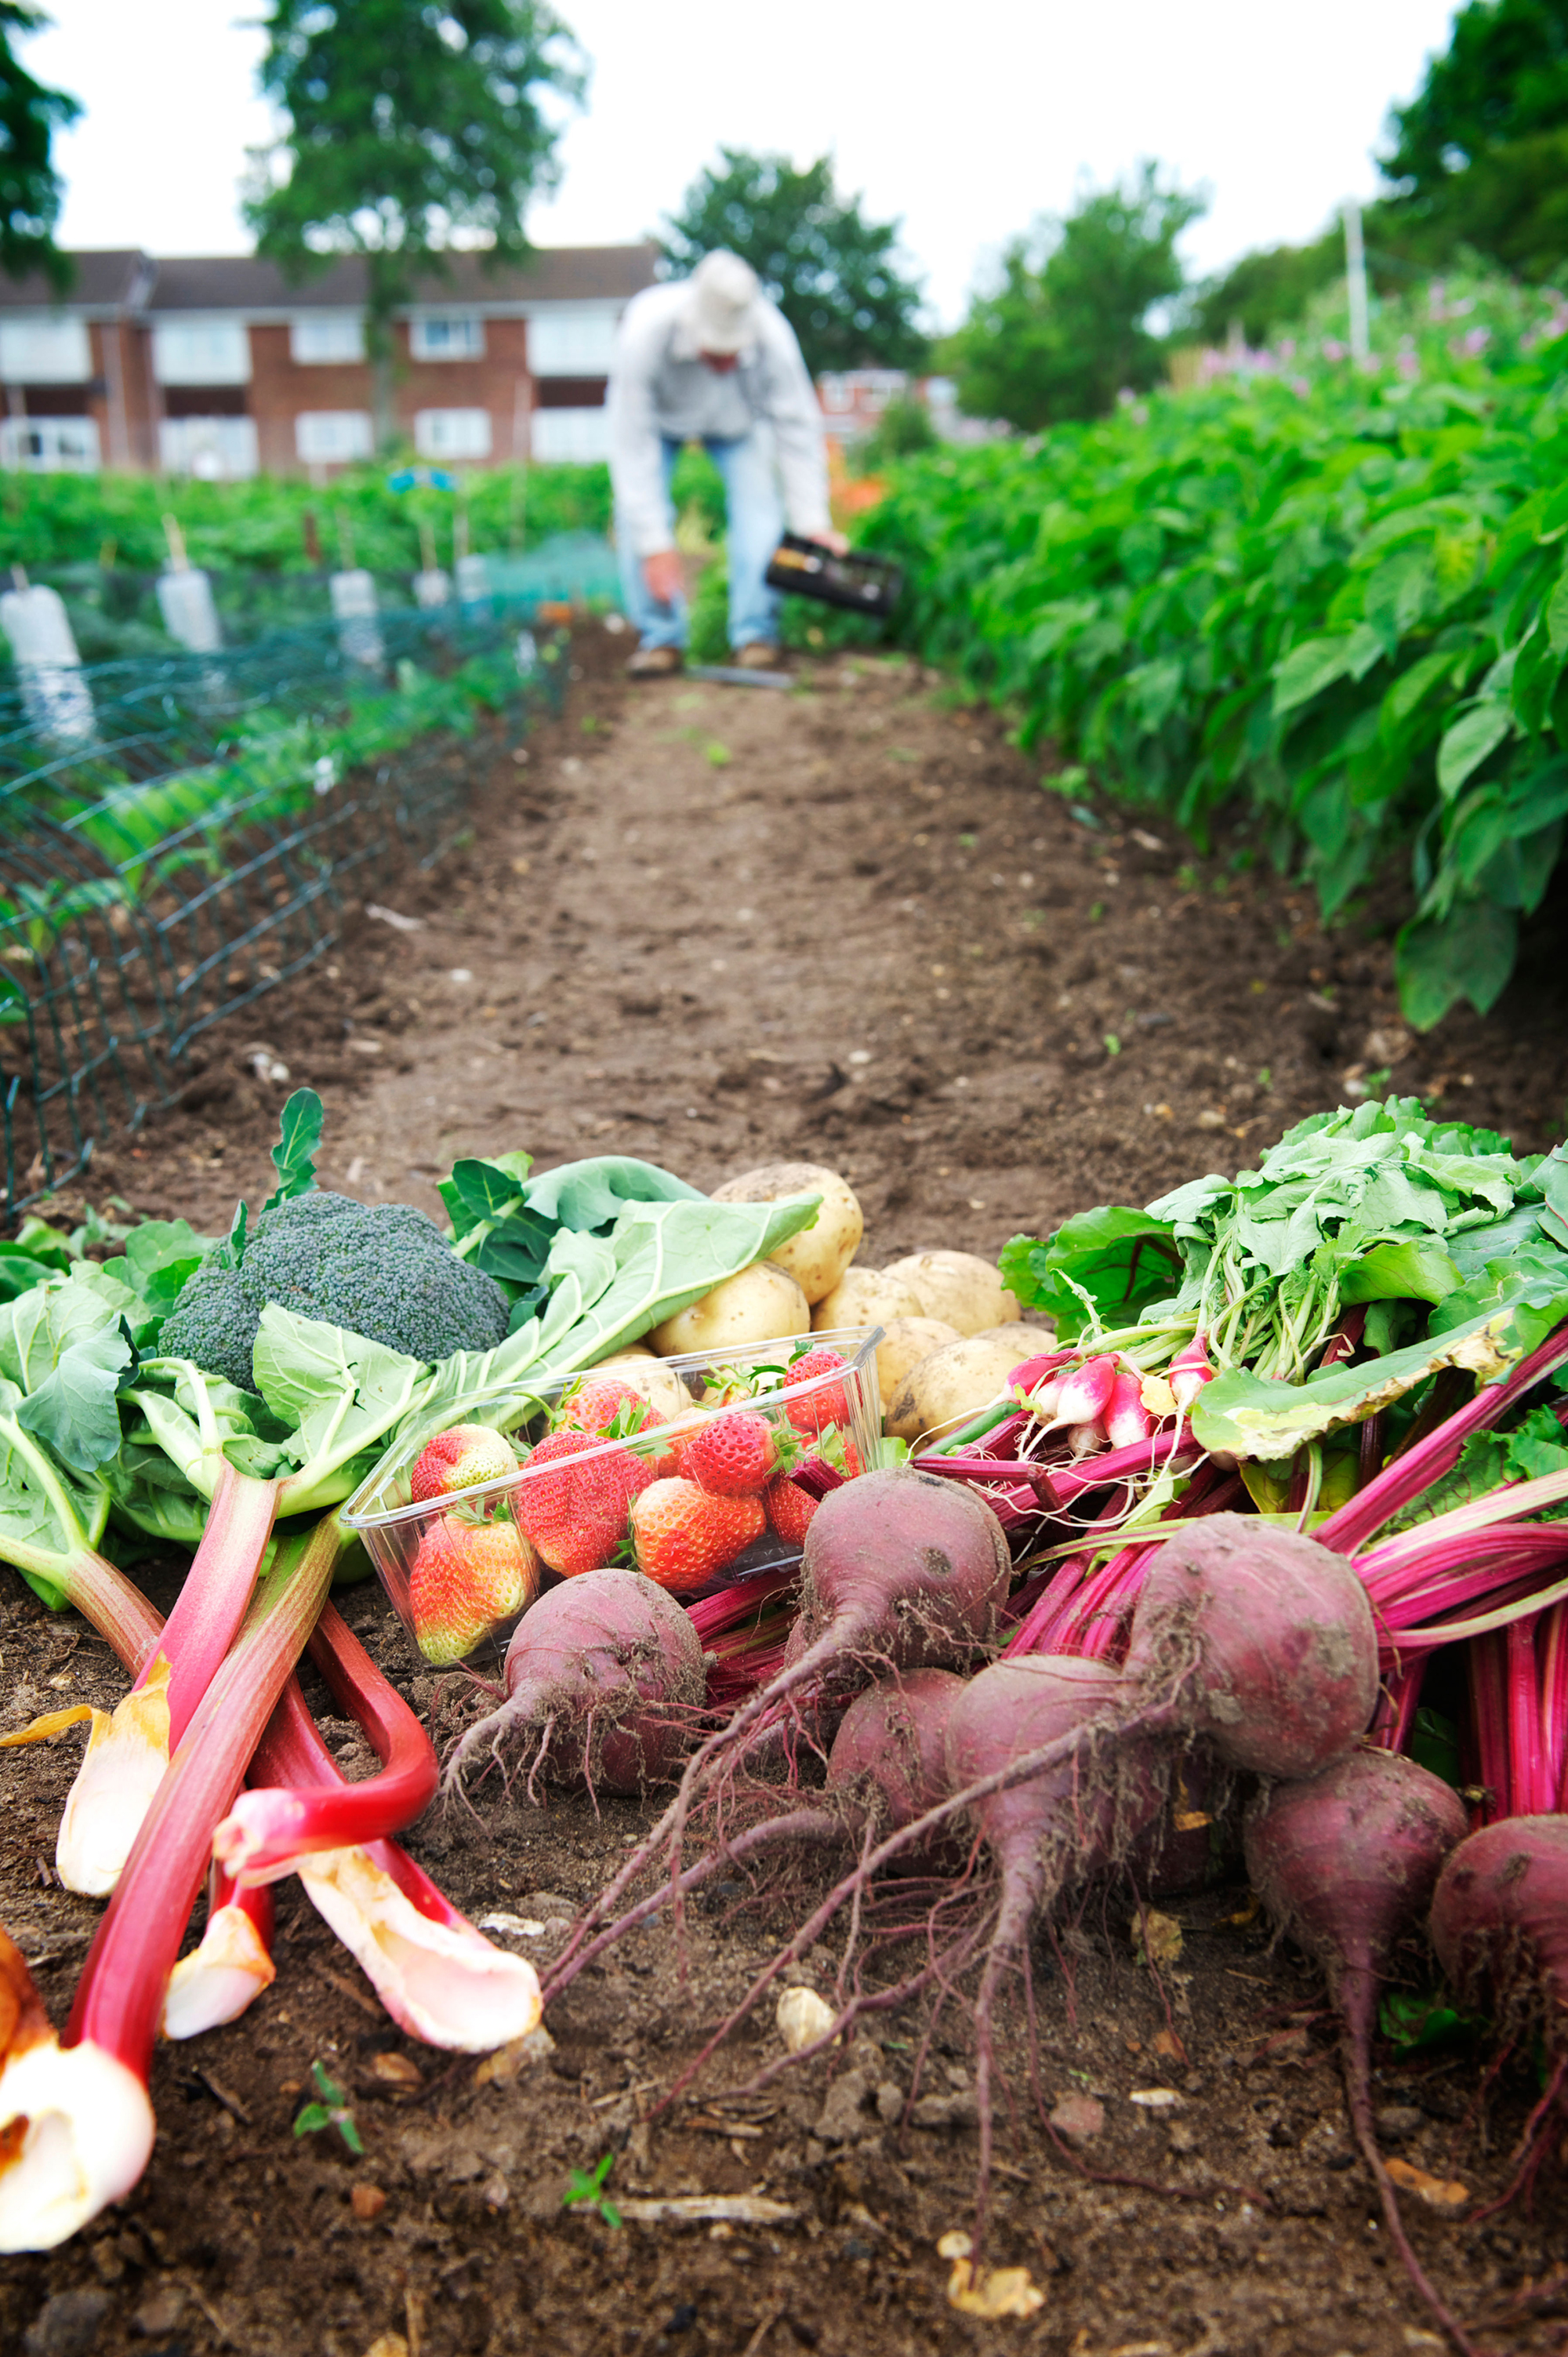 Vegetables grown in an allotment